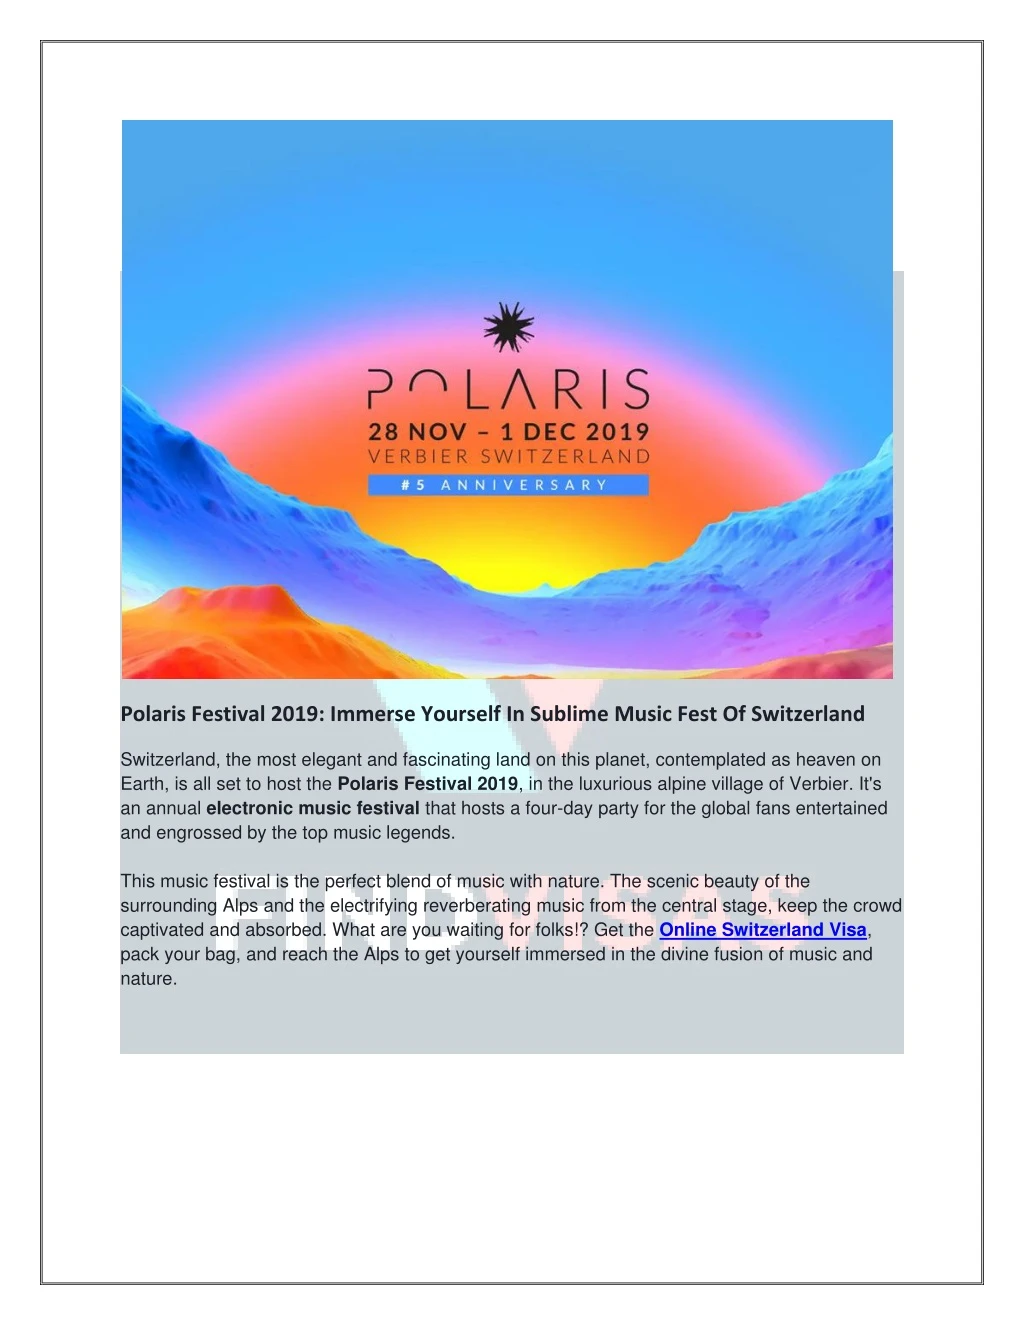 polaris festival 2019 immerse yourself in sublime